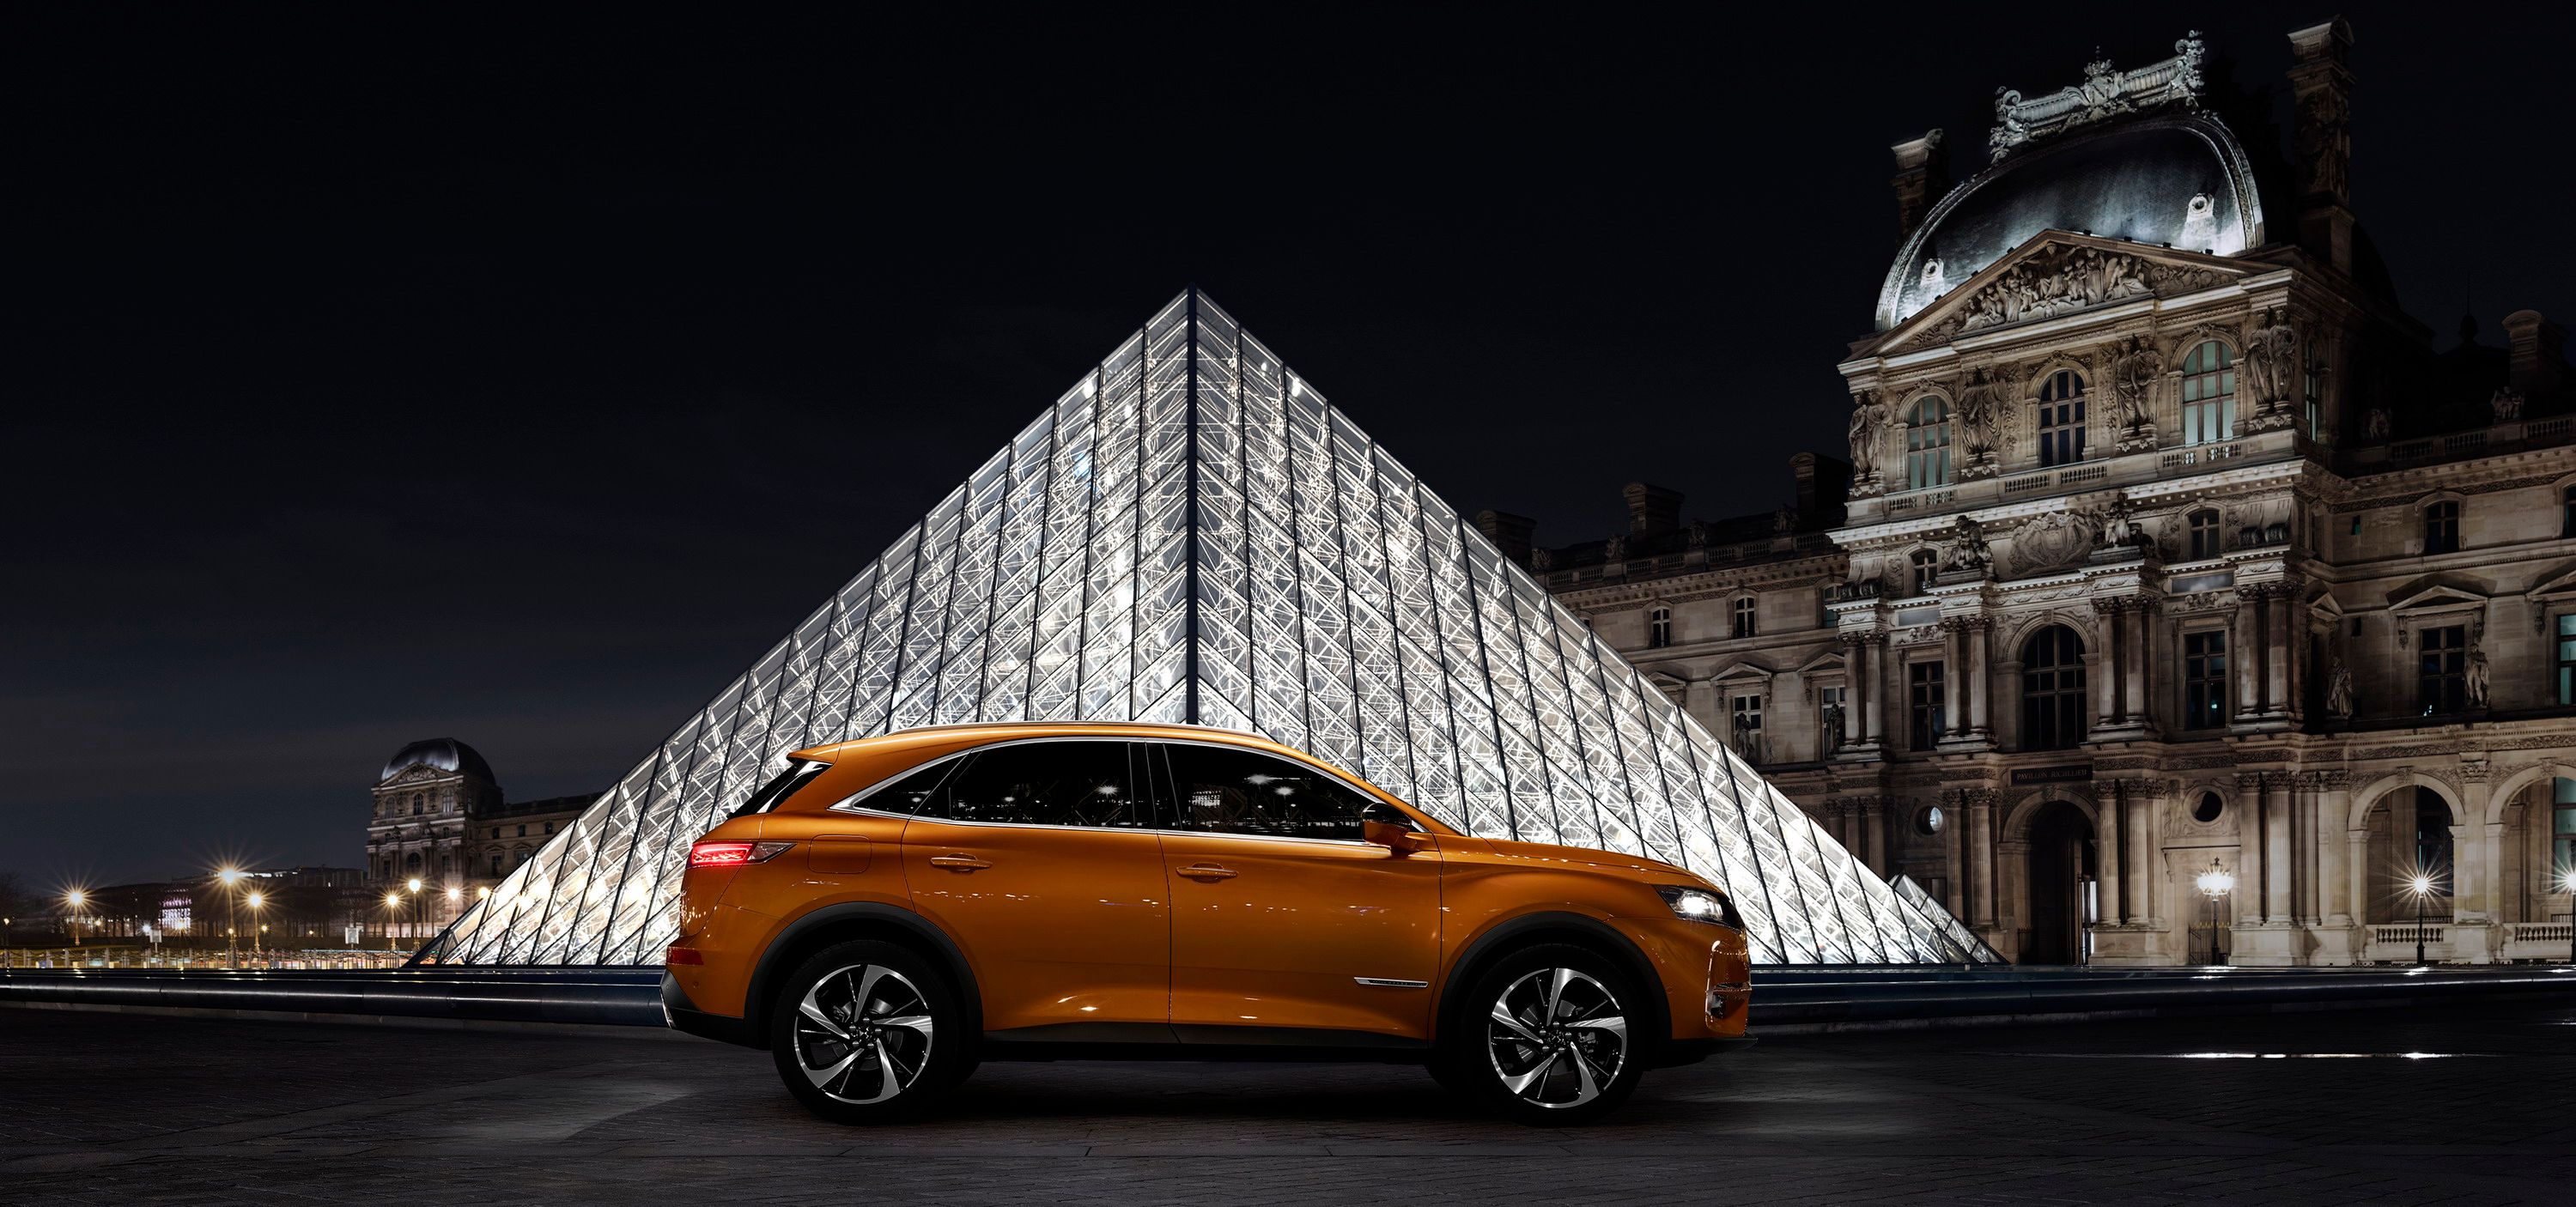 2018 DS 7 Crossback